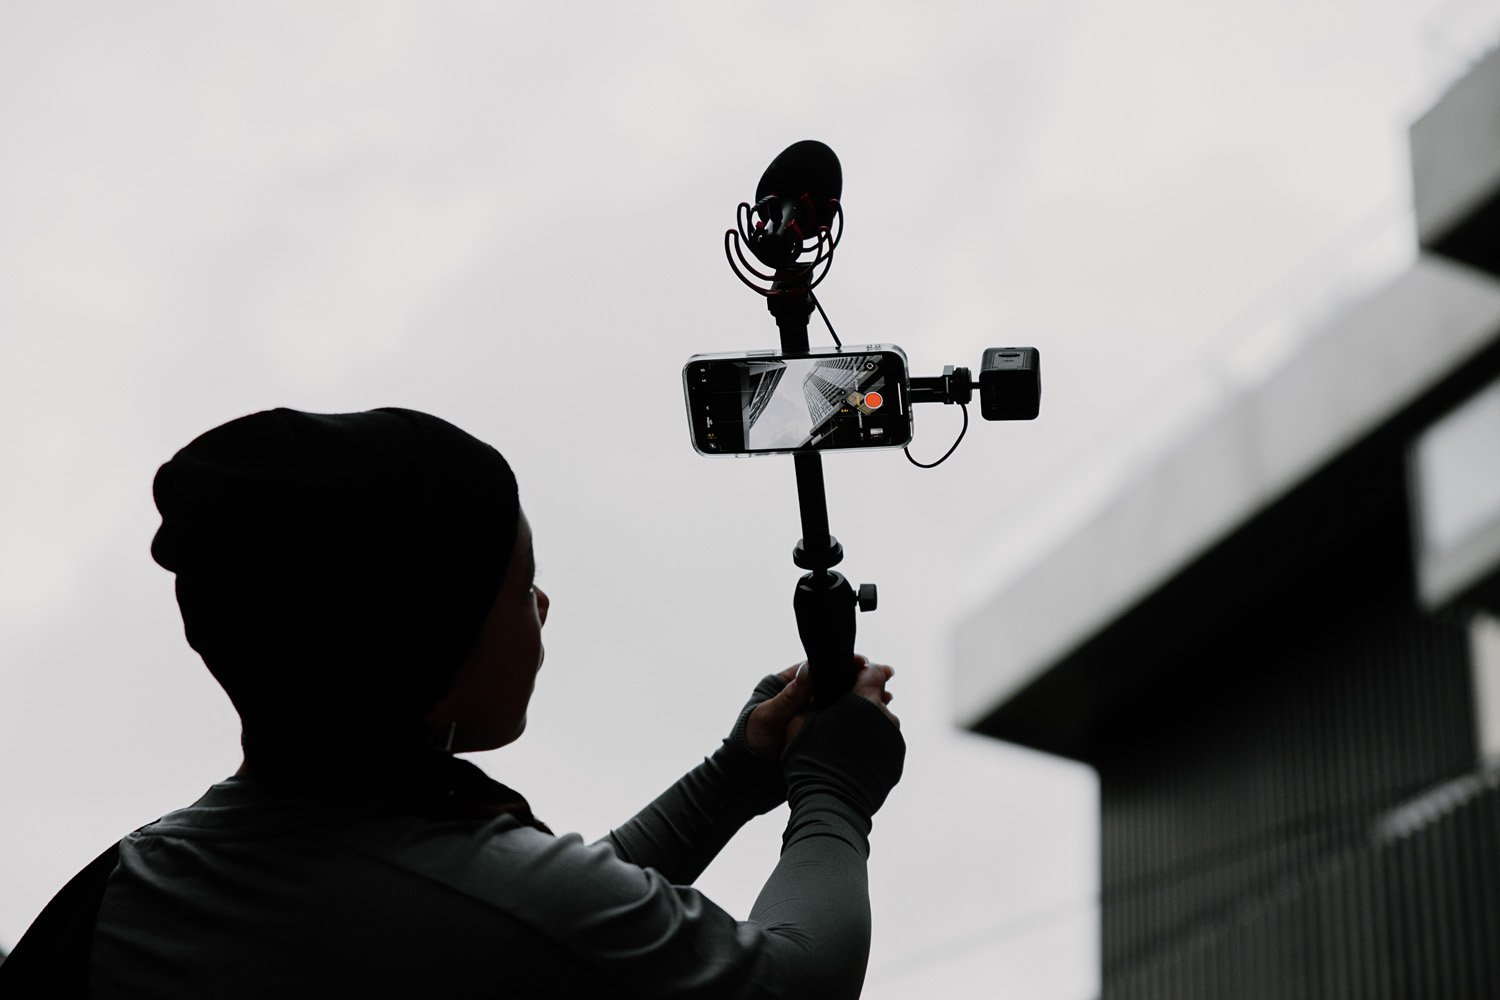 Silhouette of a person wearing a beanie, holding up a mobile filmmaking setup against a cloudy sky. The setup includes a smartphone mounted on a handheld stick mount, equipped with a RØDE microphone and an external light source. The backdrop suggests an urban setting, ideal for on-the-go content creation